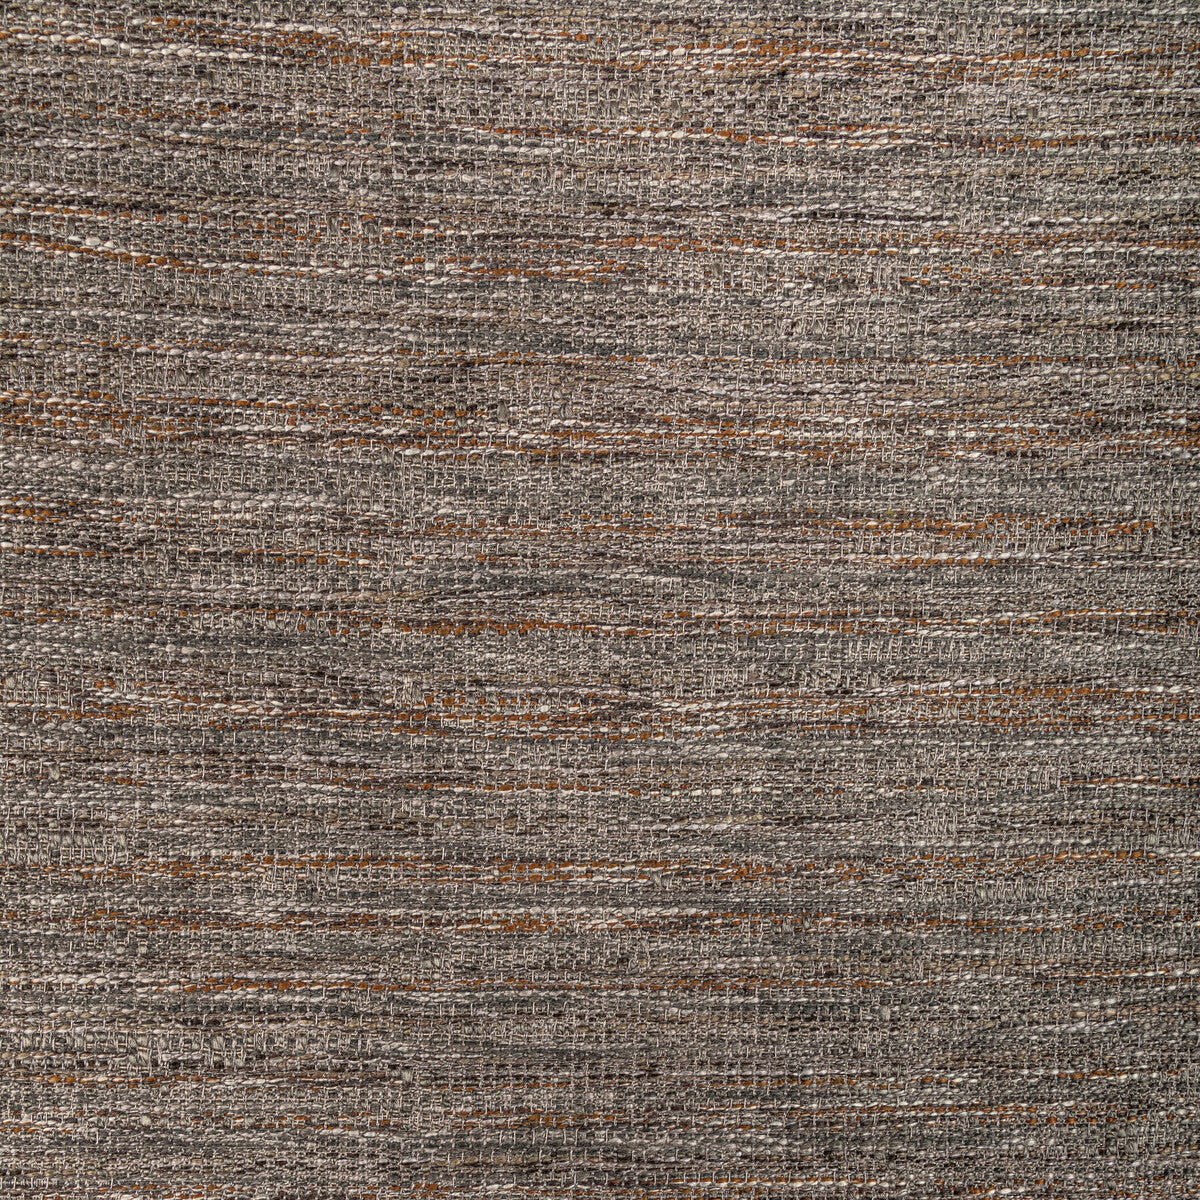 Bosco fabric in birch color - pattern 36325.106.0 - by Kravet Contract